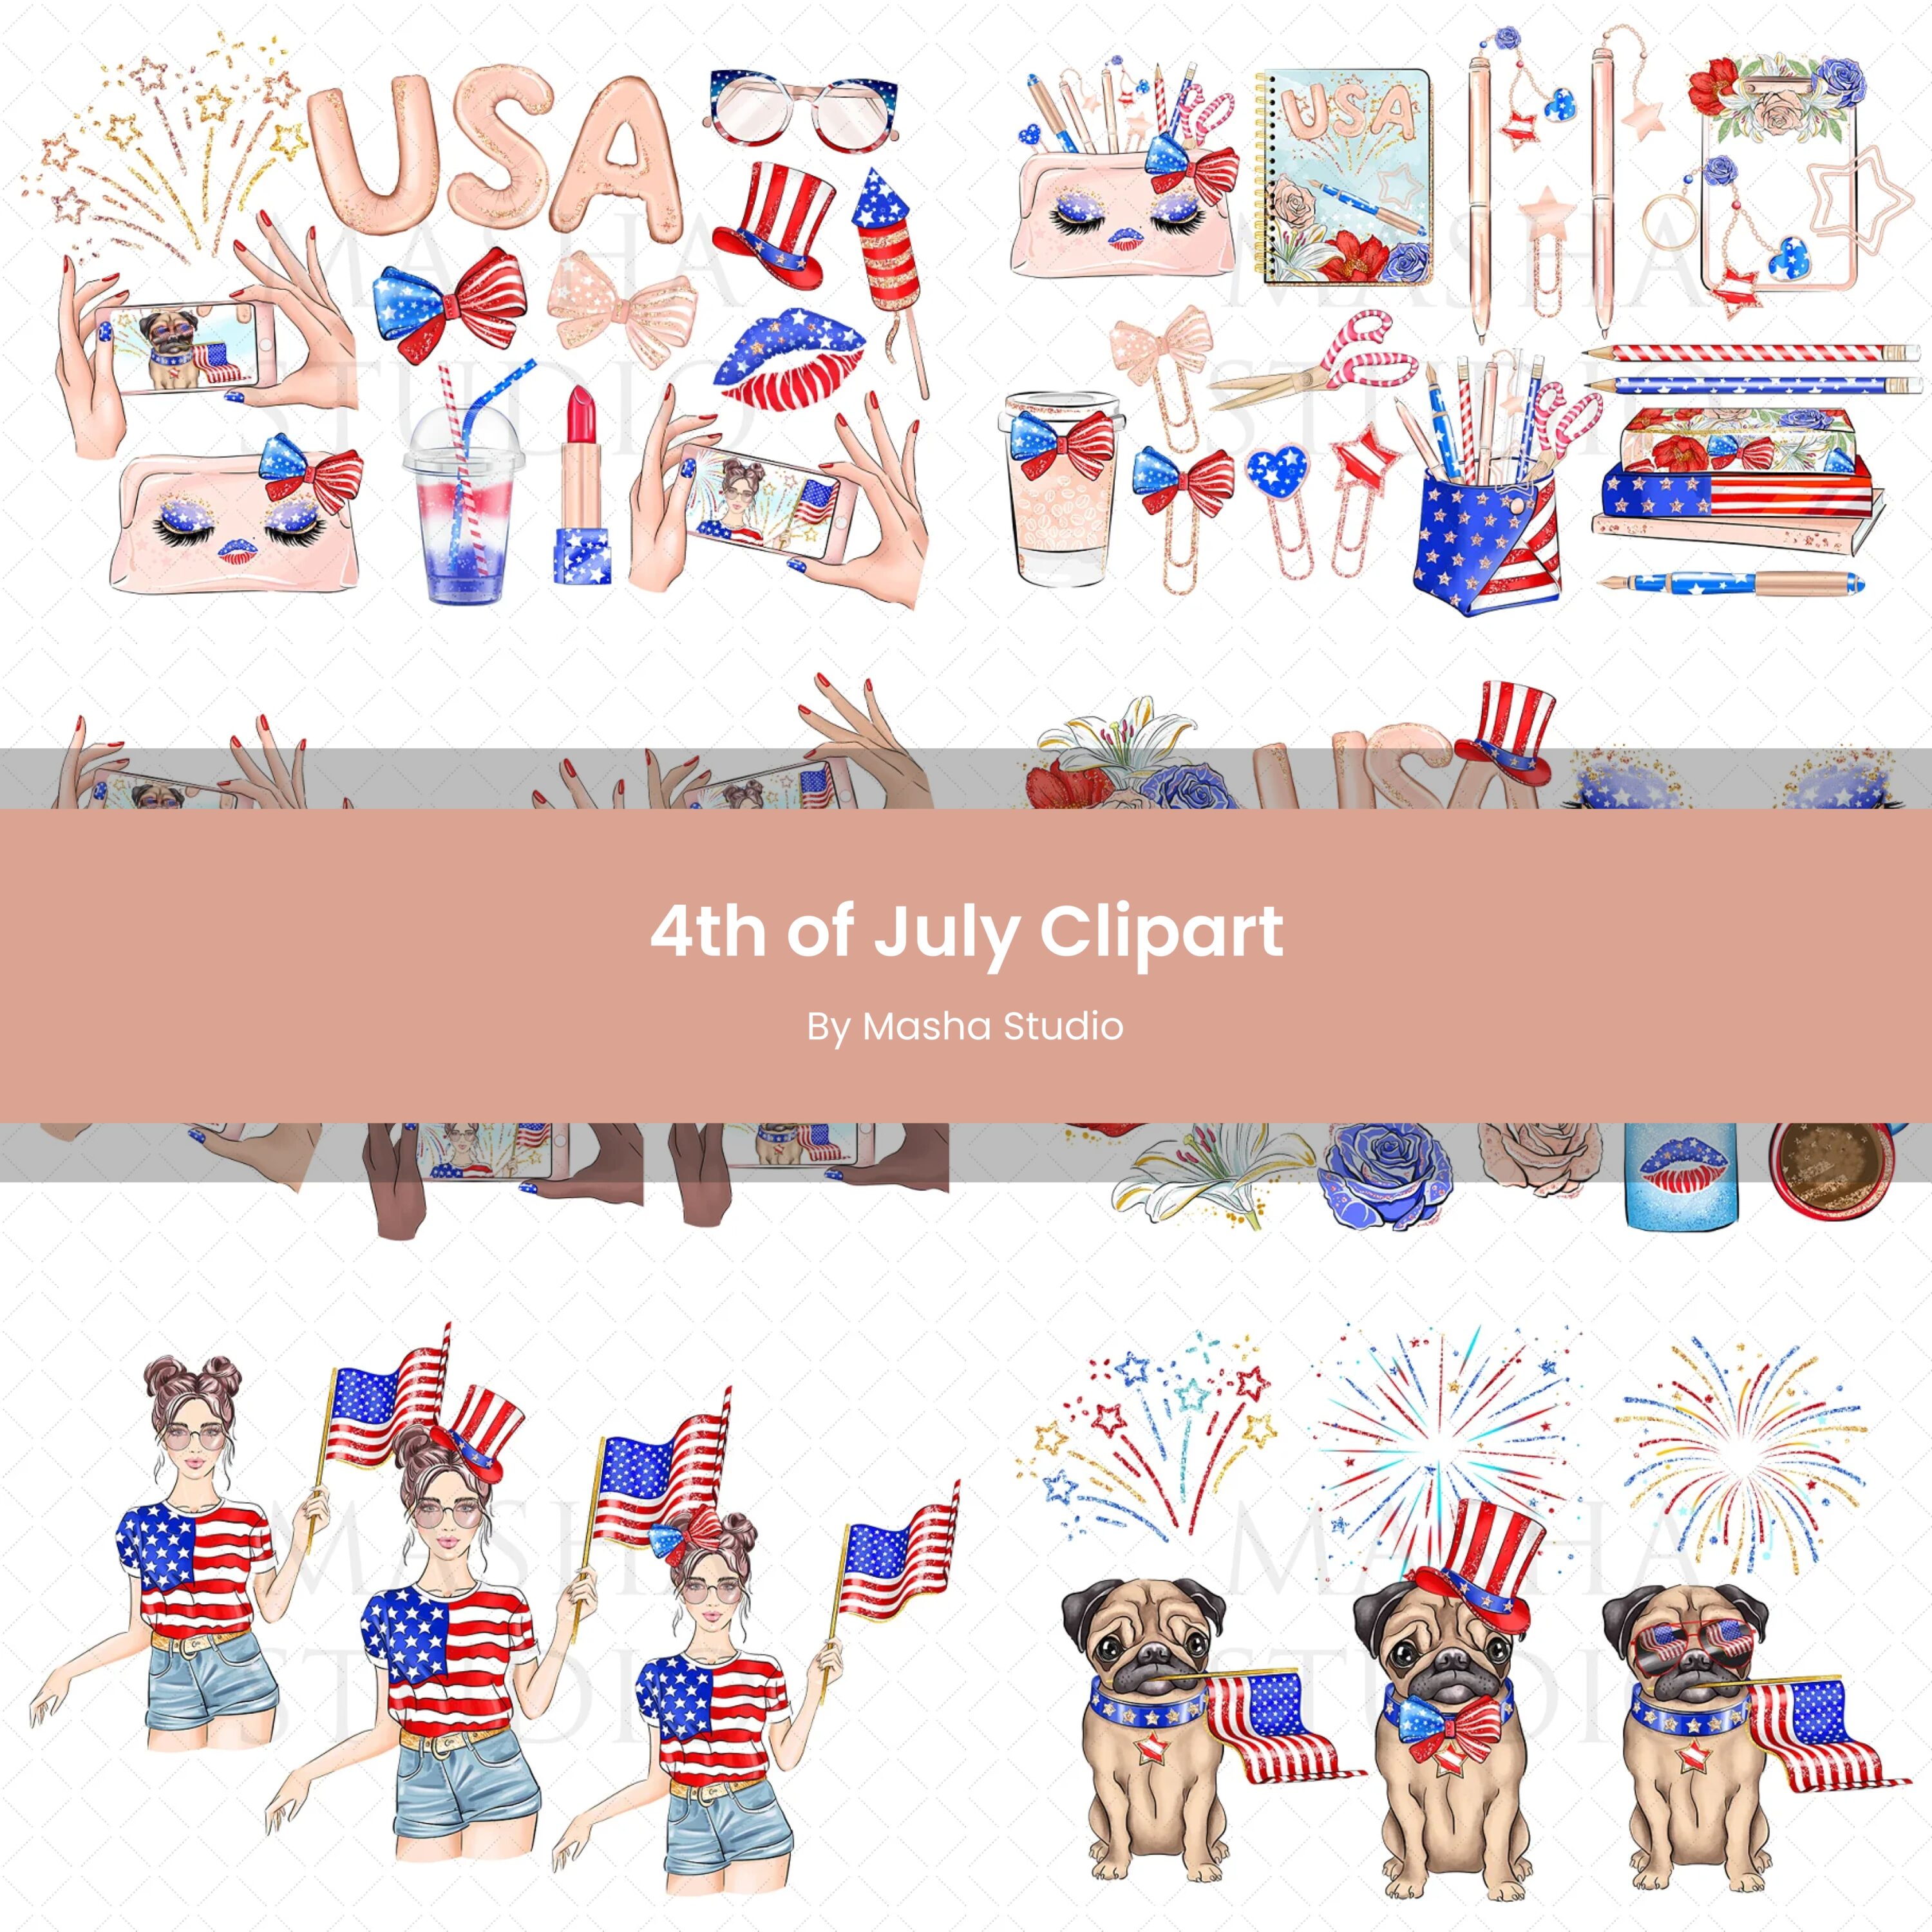 4th of july clipart.